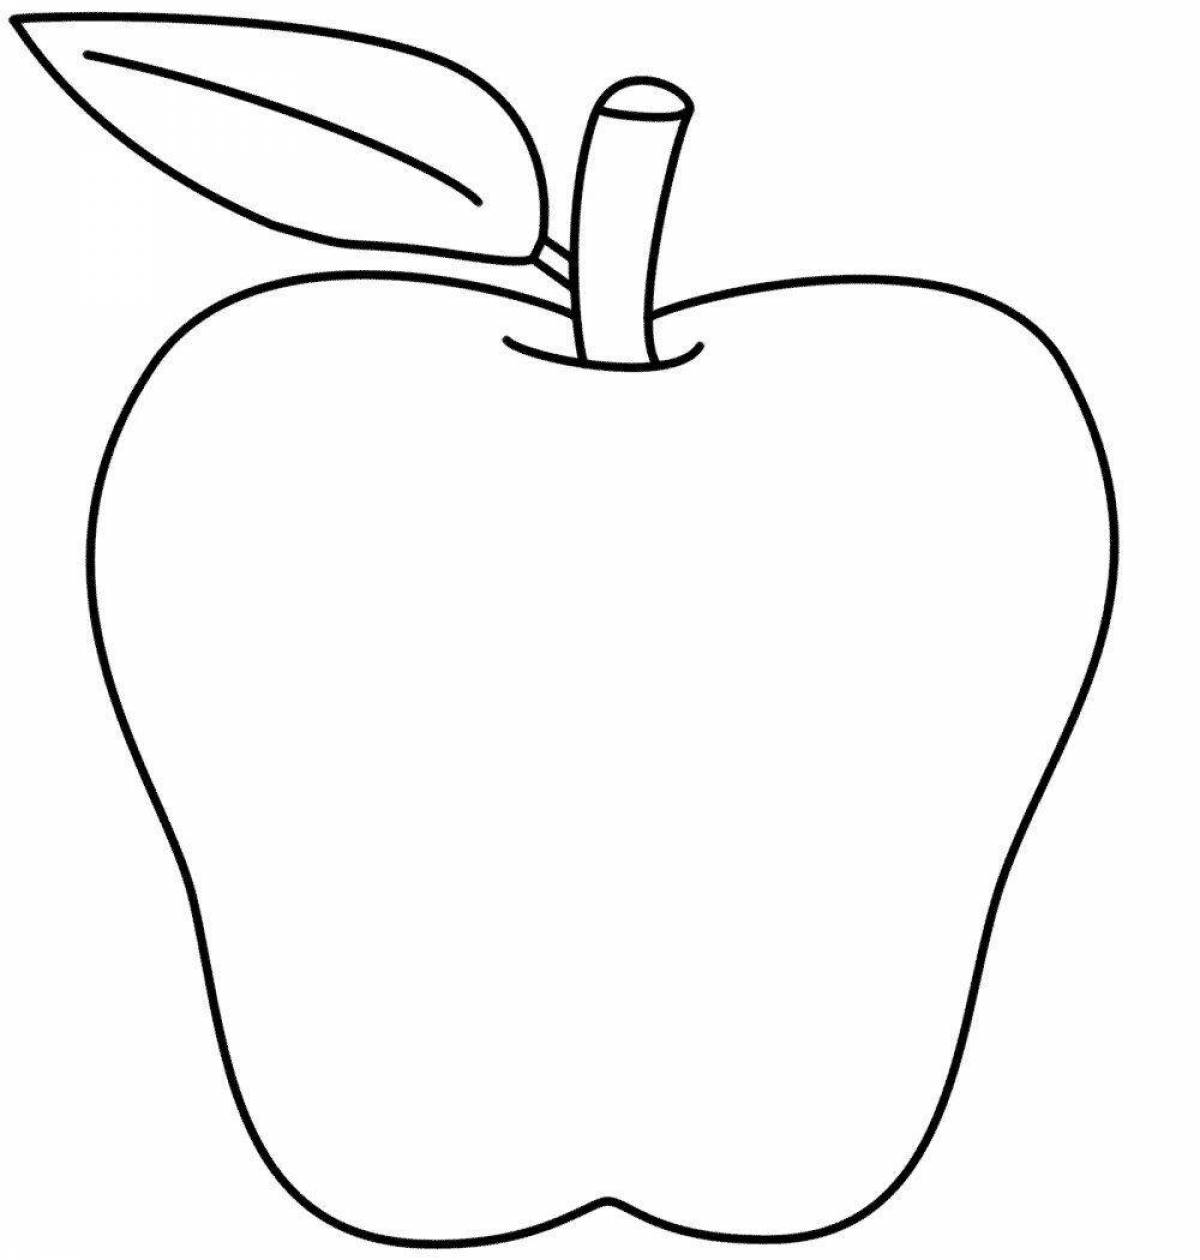 Coloring book apple crazy color for children 4-5 years old